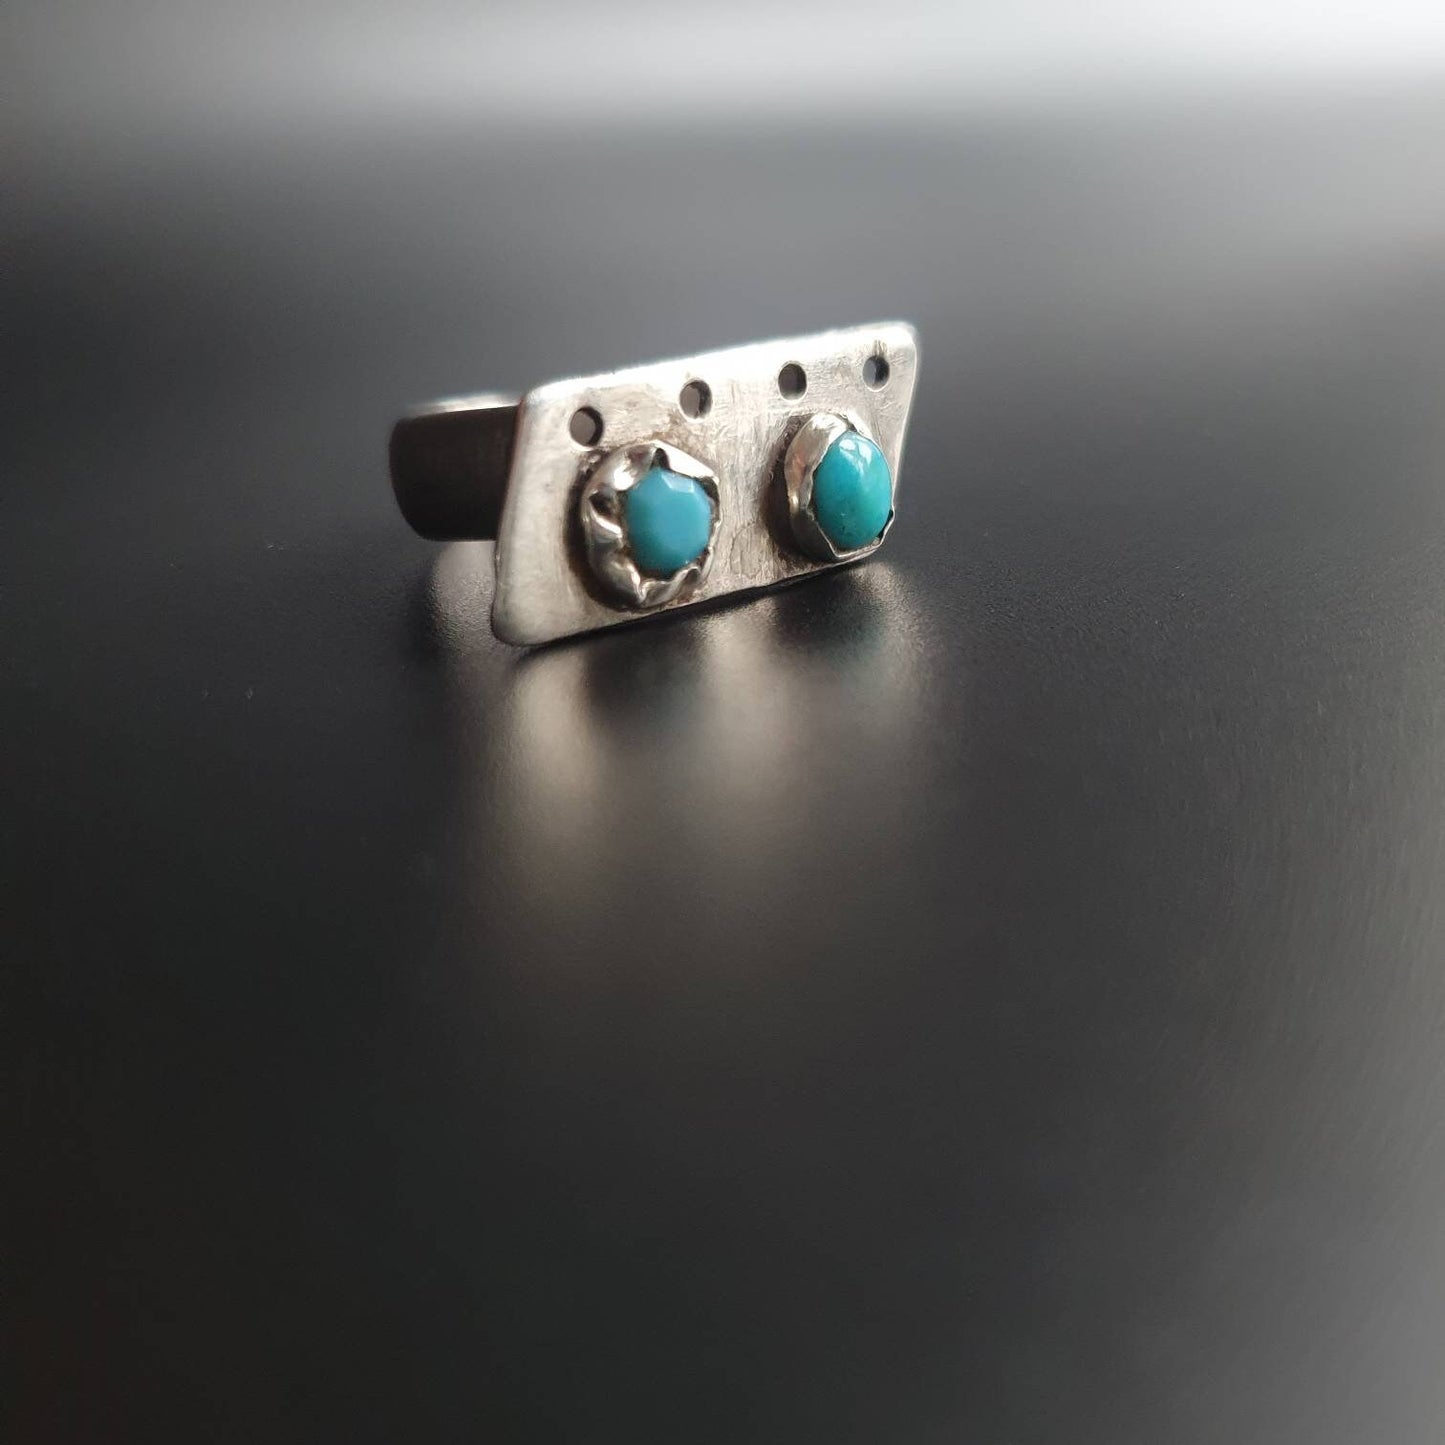 Silver Statement Ring, Chunky statement ring, Turquoise gemstone, handmade ring,silver ring, gifts for all occasions, unique style jewelry